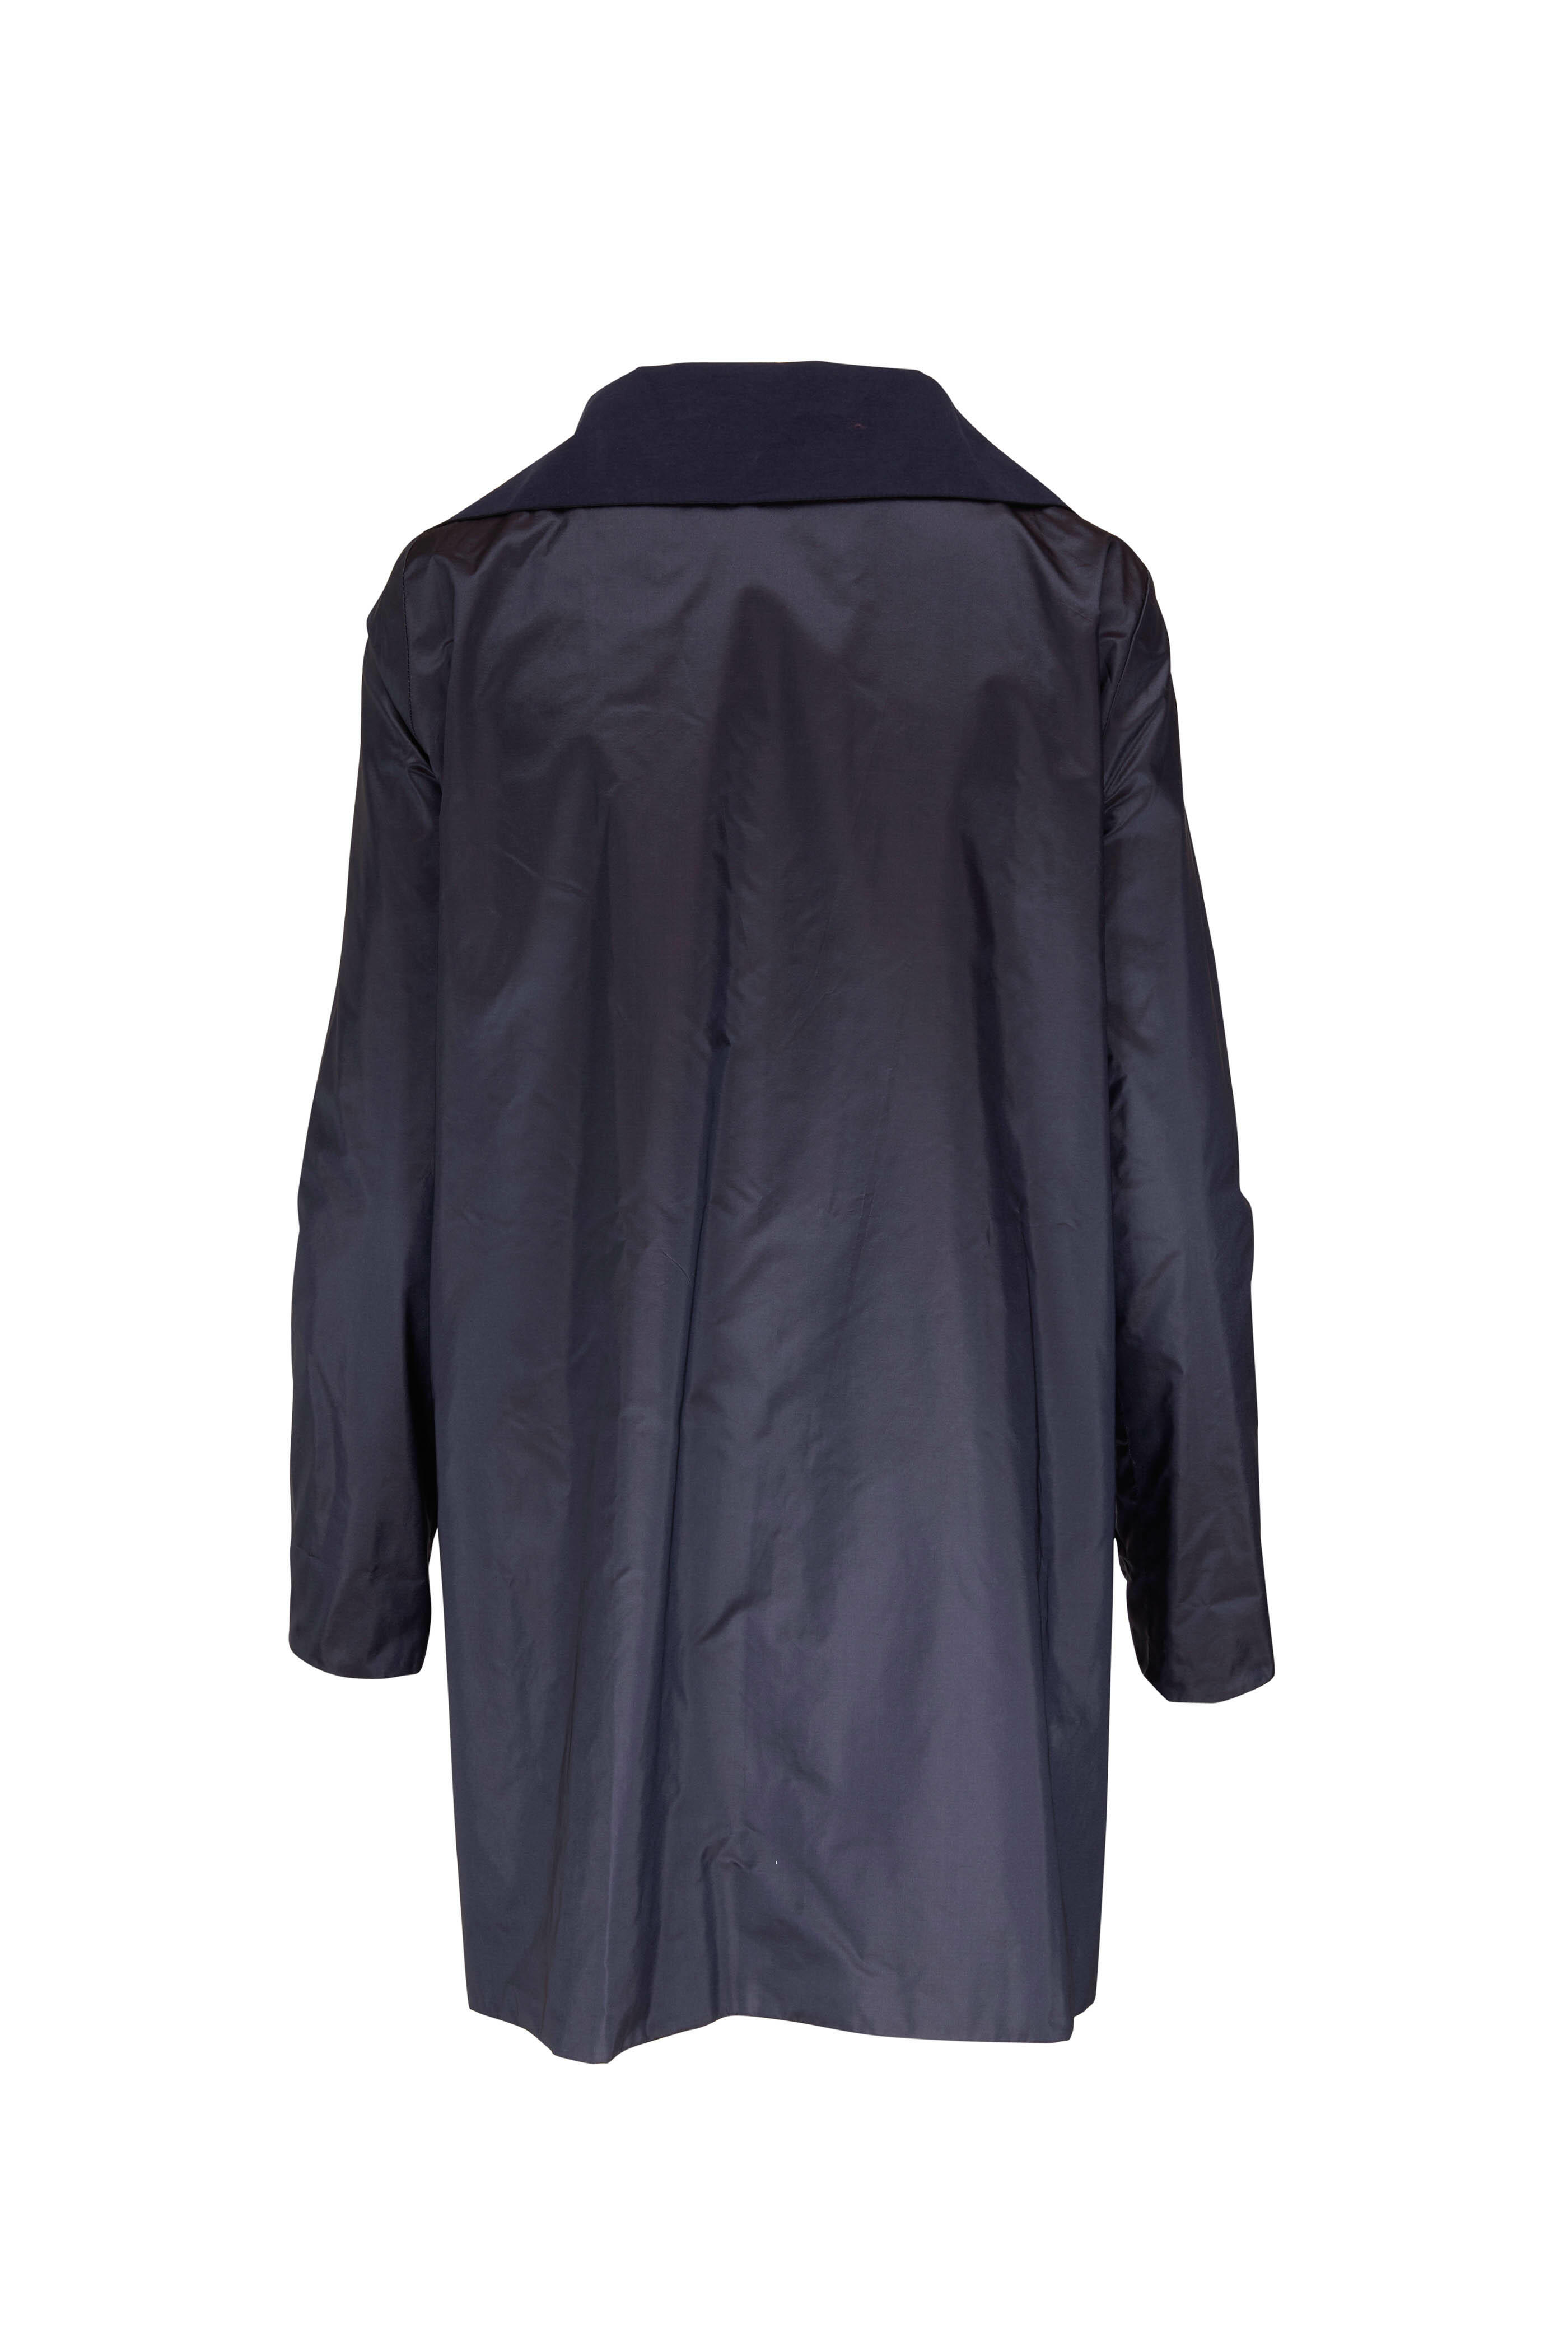 Peter Cohen - Wrench Navy Reversible Coat | Mitchell Stores